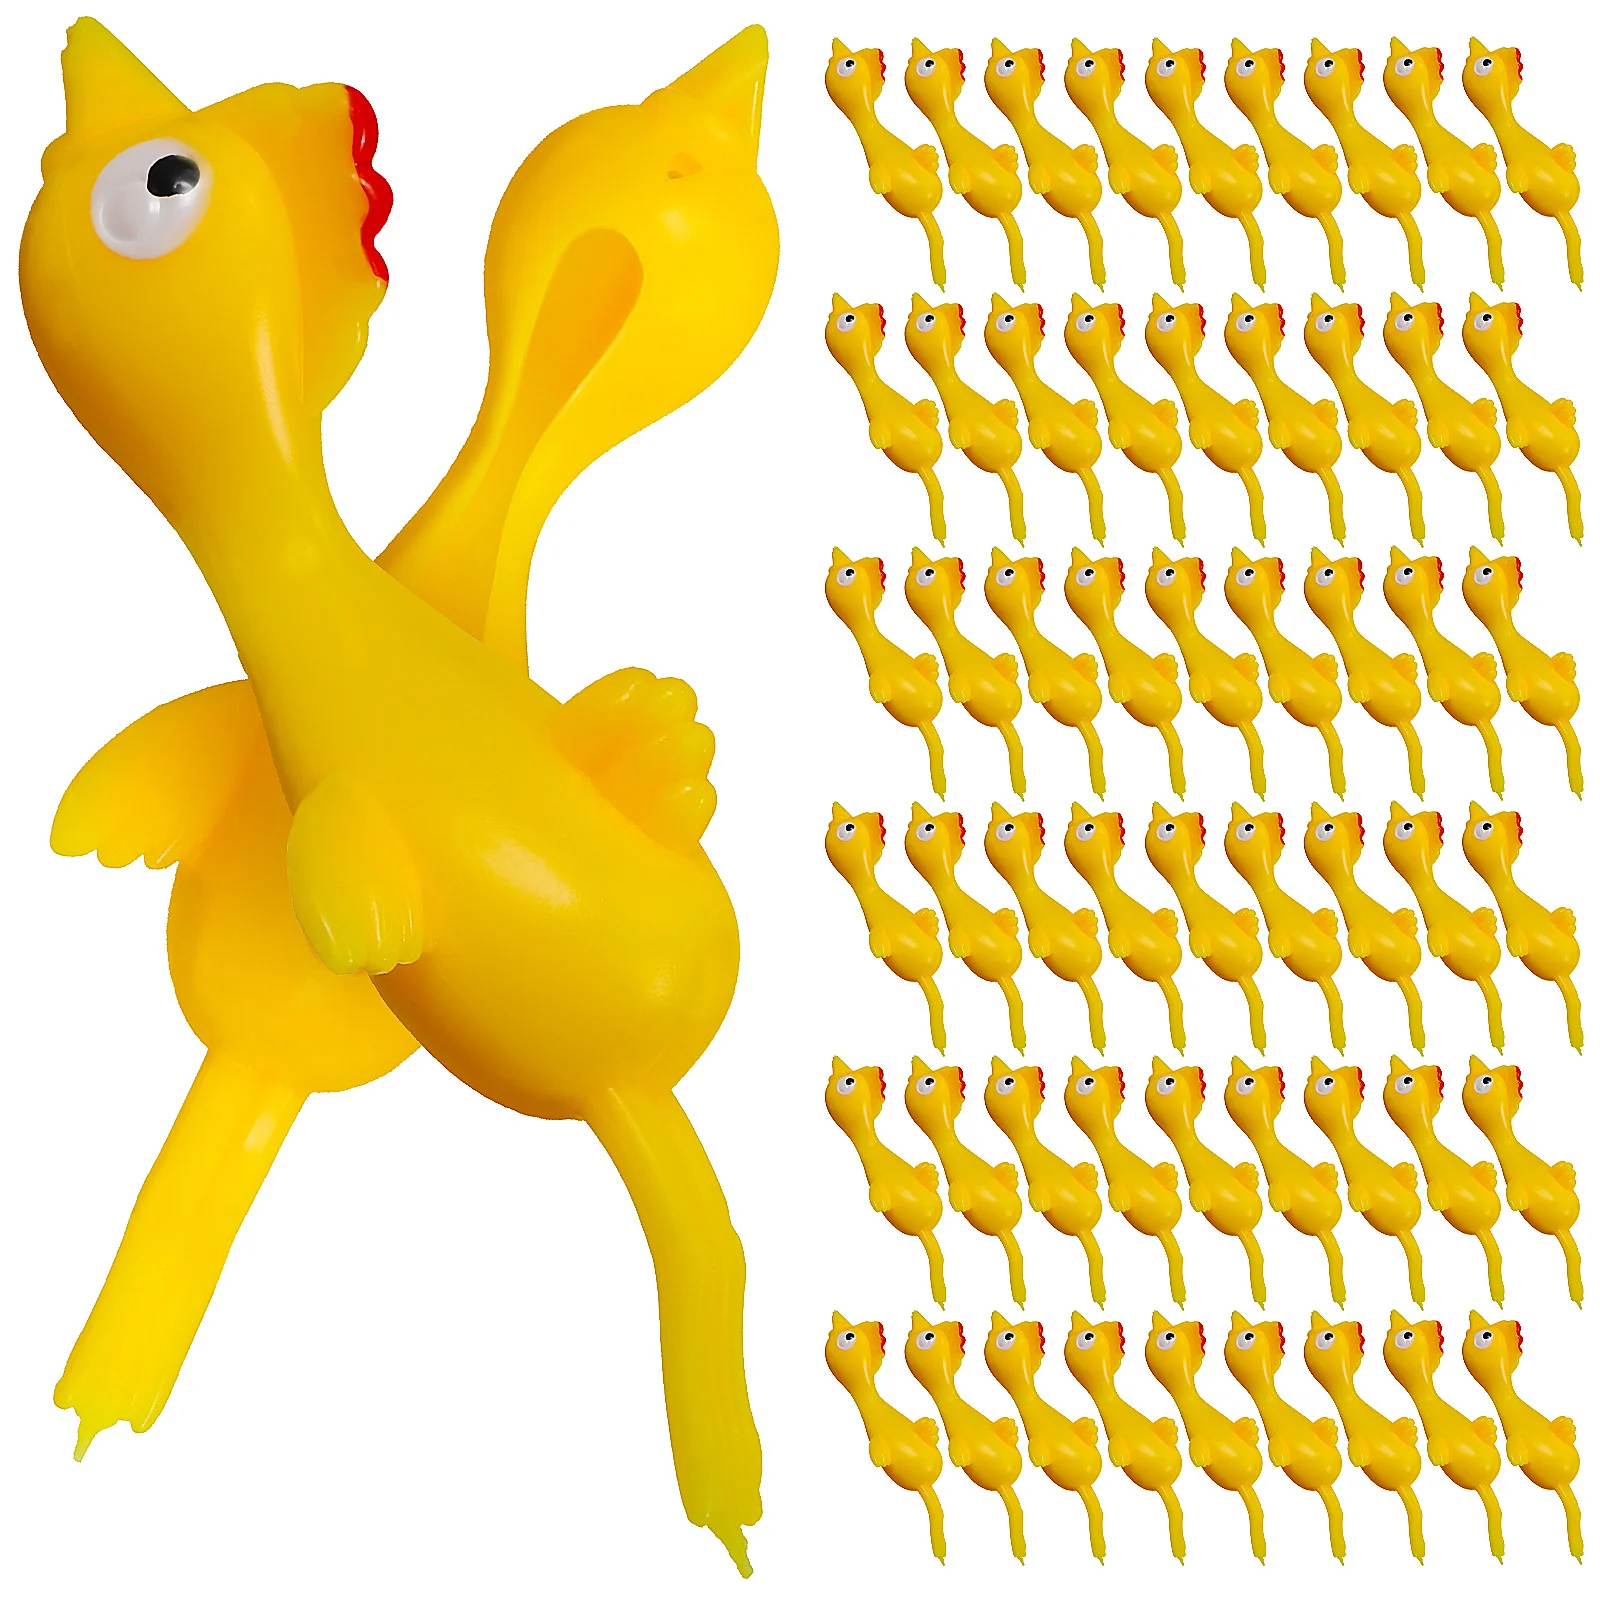 

Flick Chickens Rubber Stretchy Flying Chickens Fingers Stretchy Chicks Rubber Chicken Ornament Chickens Flick Favors